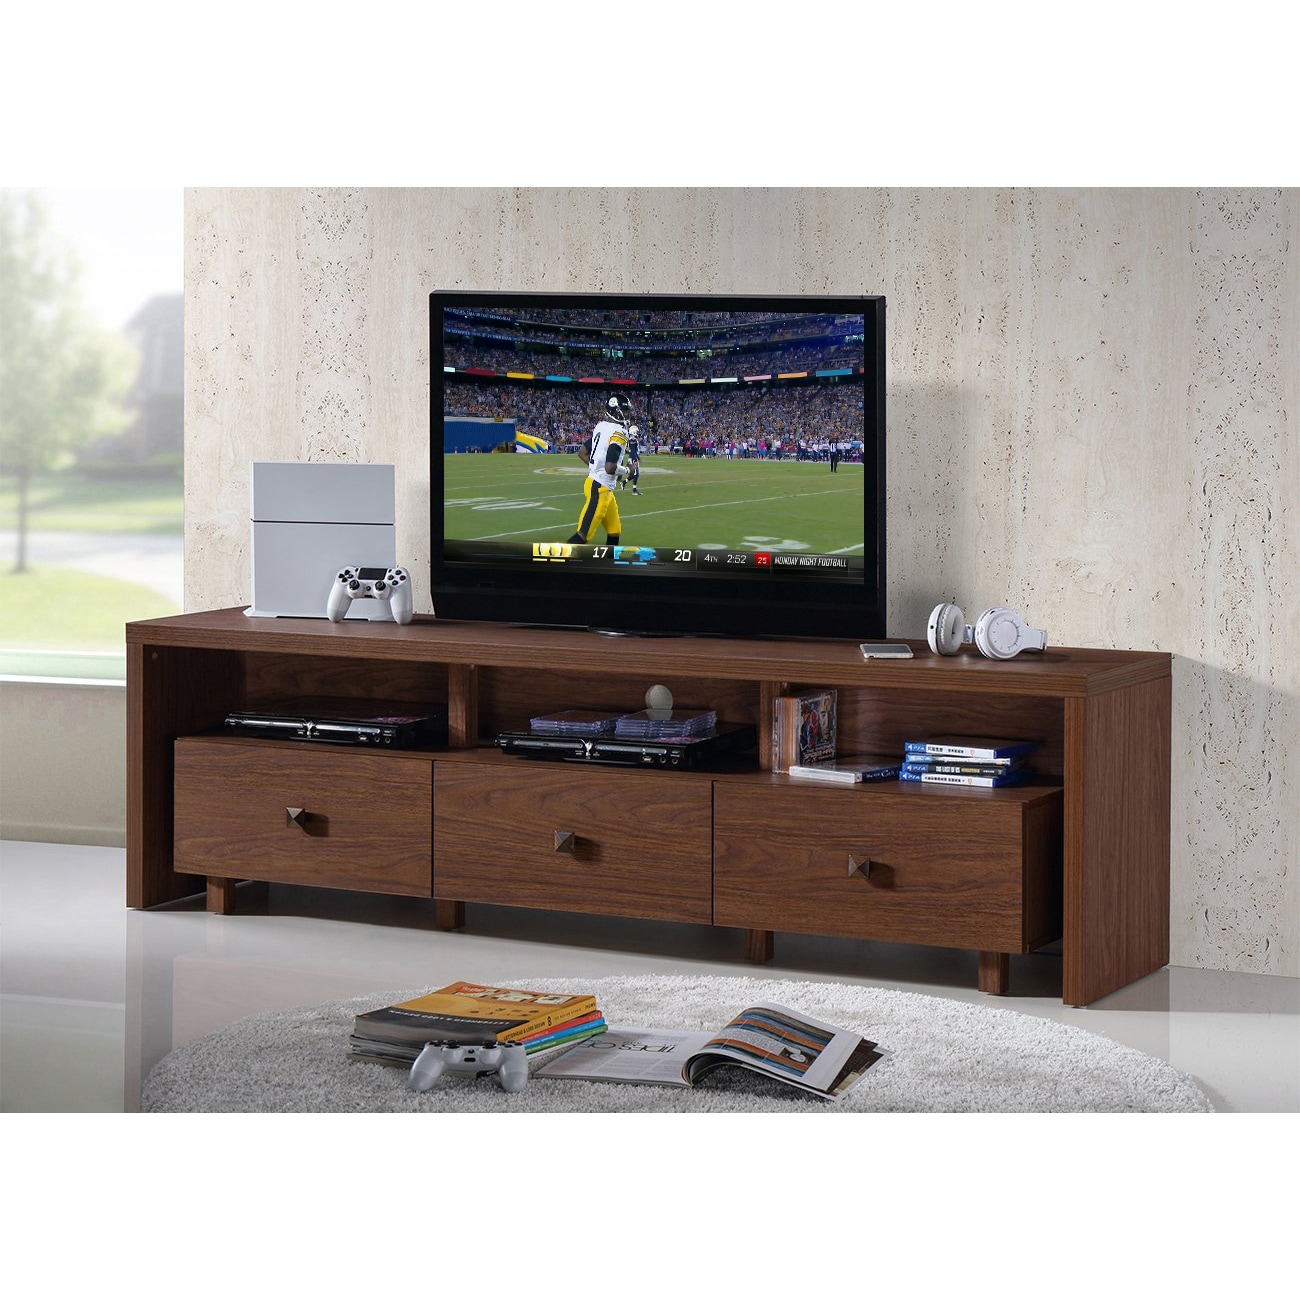 Urban Designs Elegant TV Stand For TVs Up To 75 Inches With 